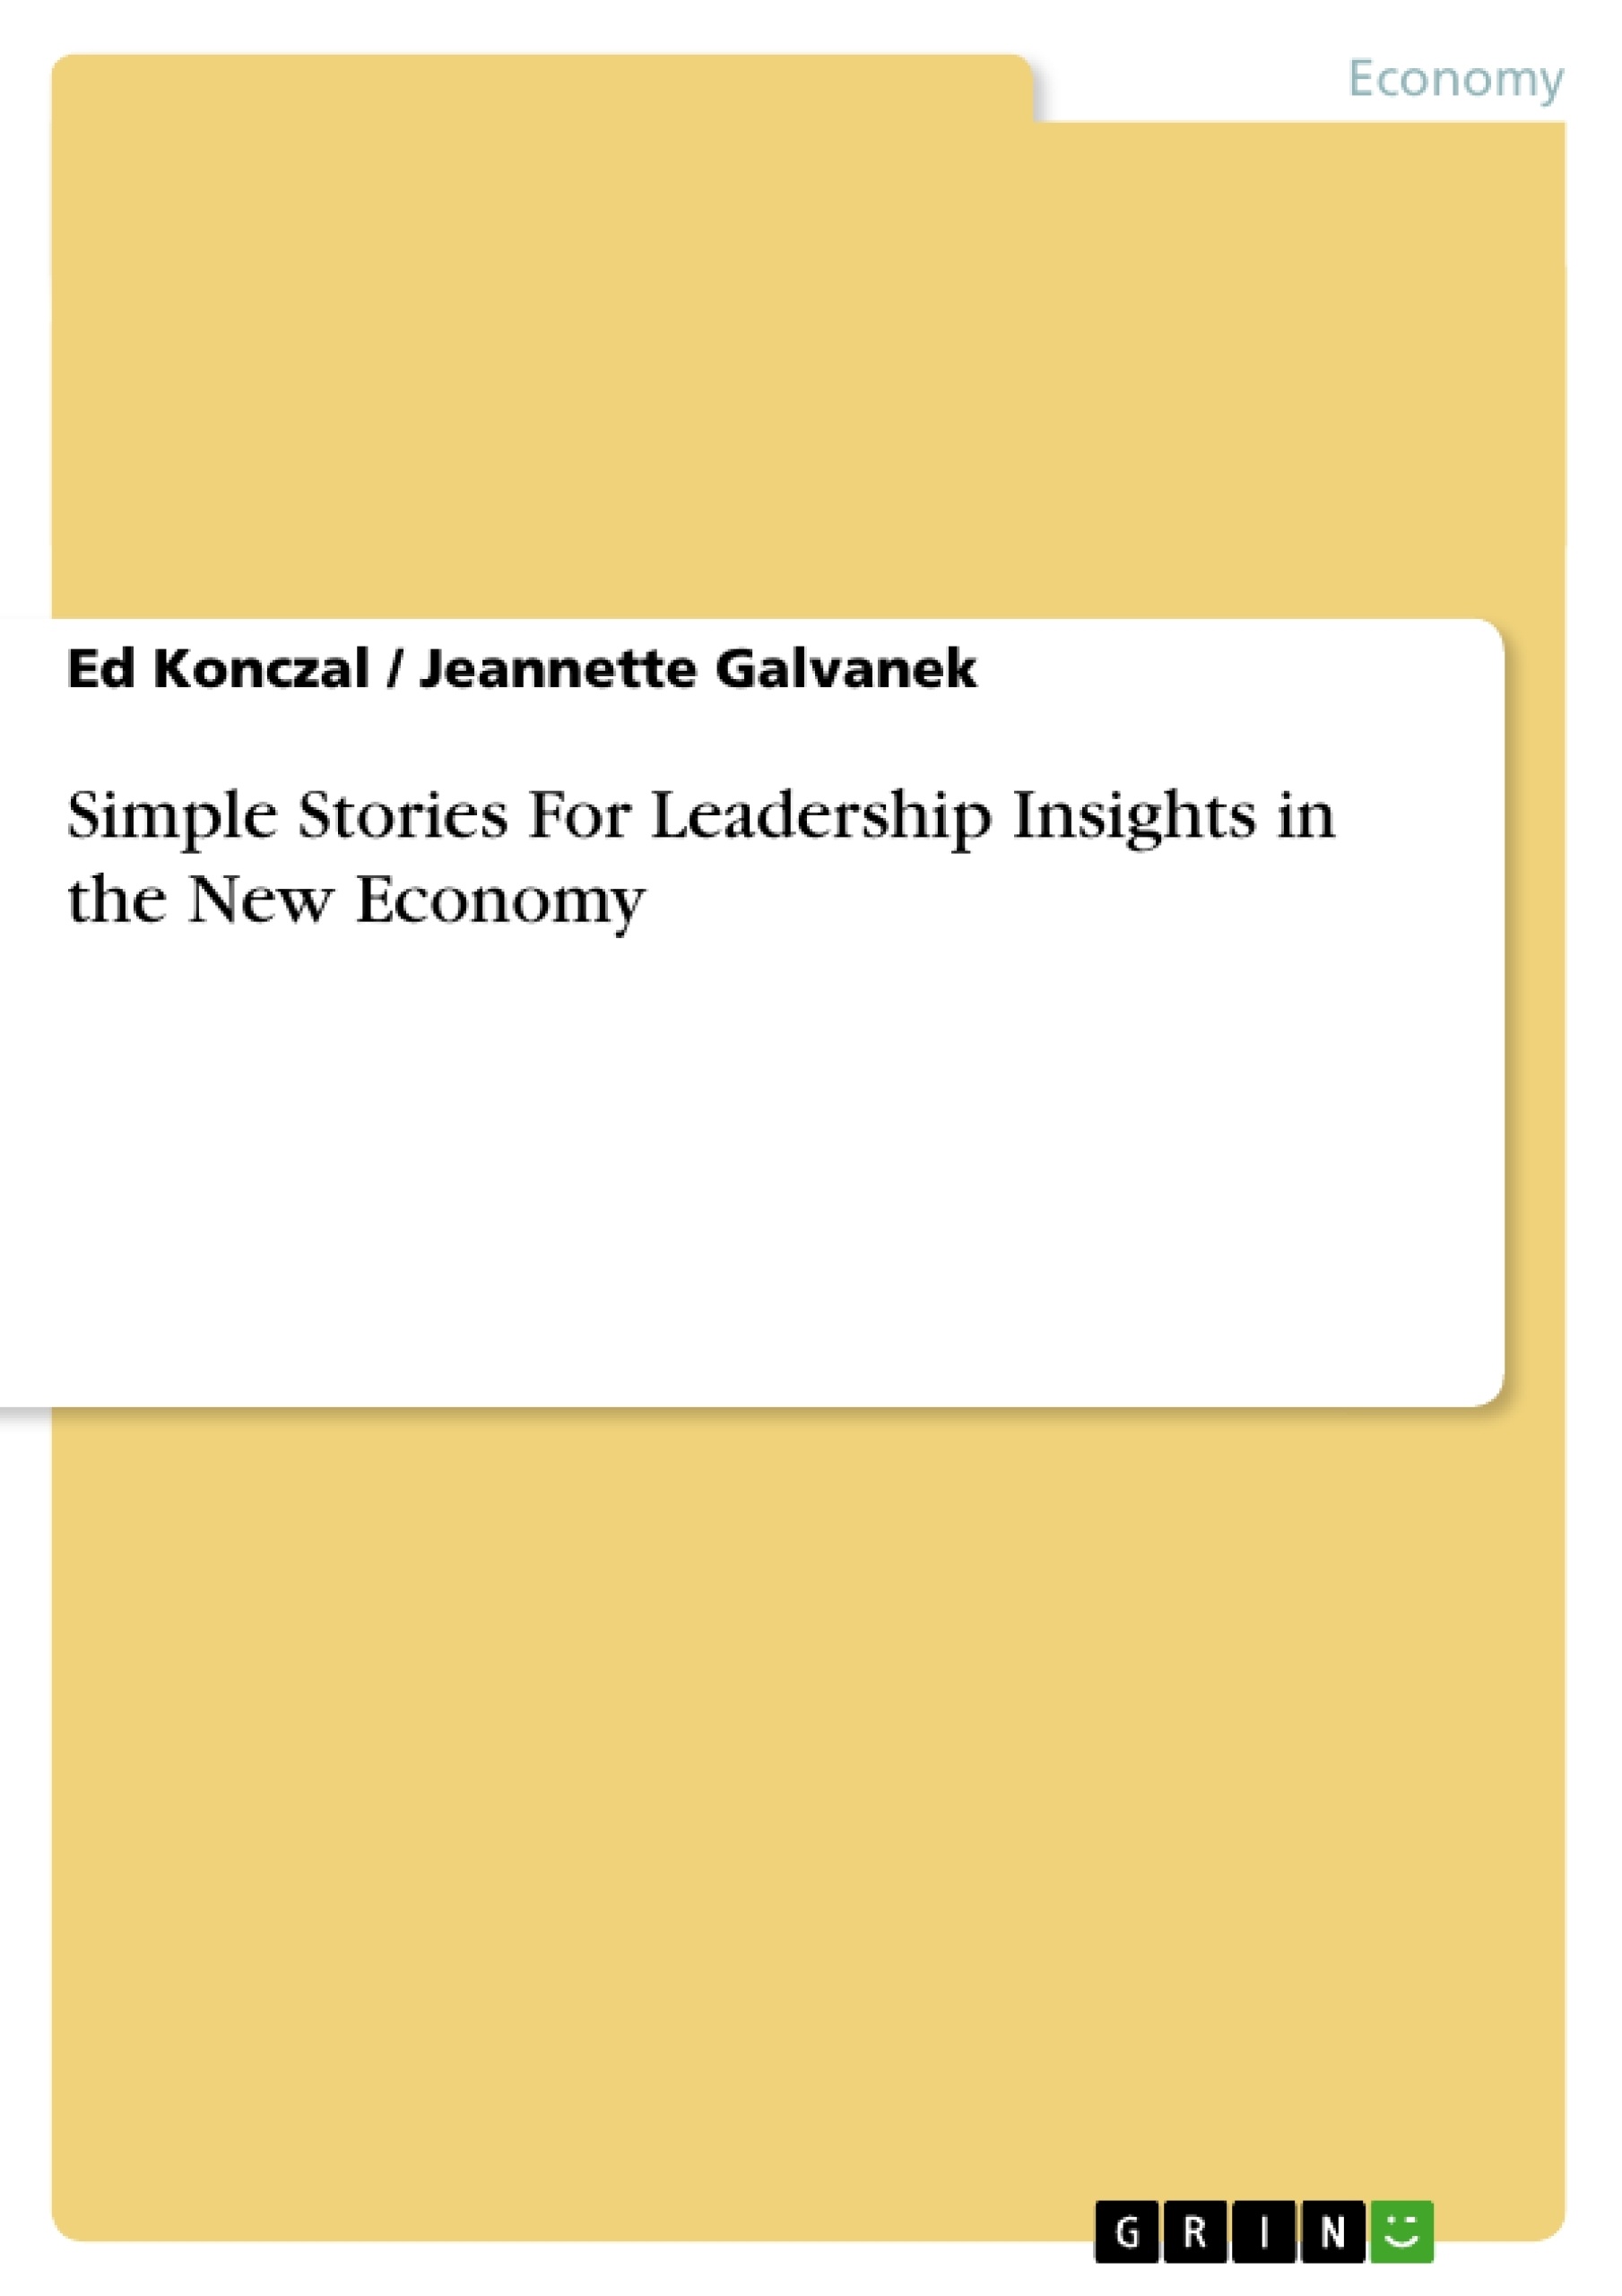 Titre: Simple Stories For Leadership Insights in the New Economy